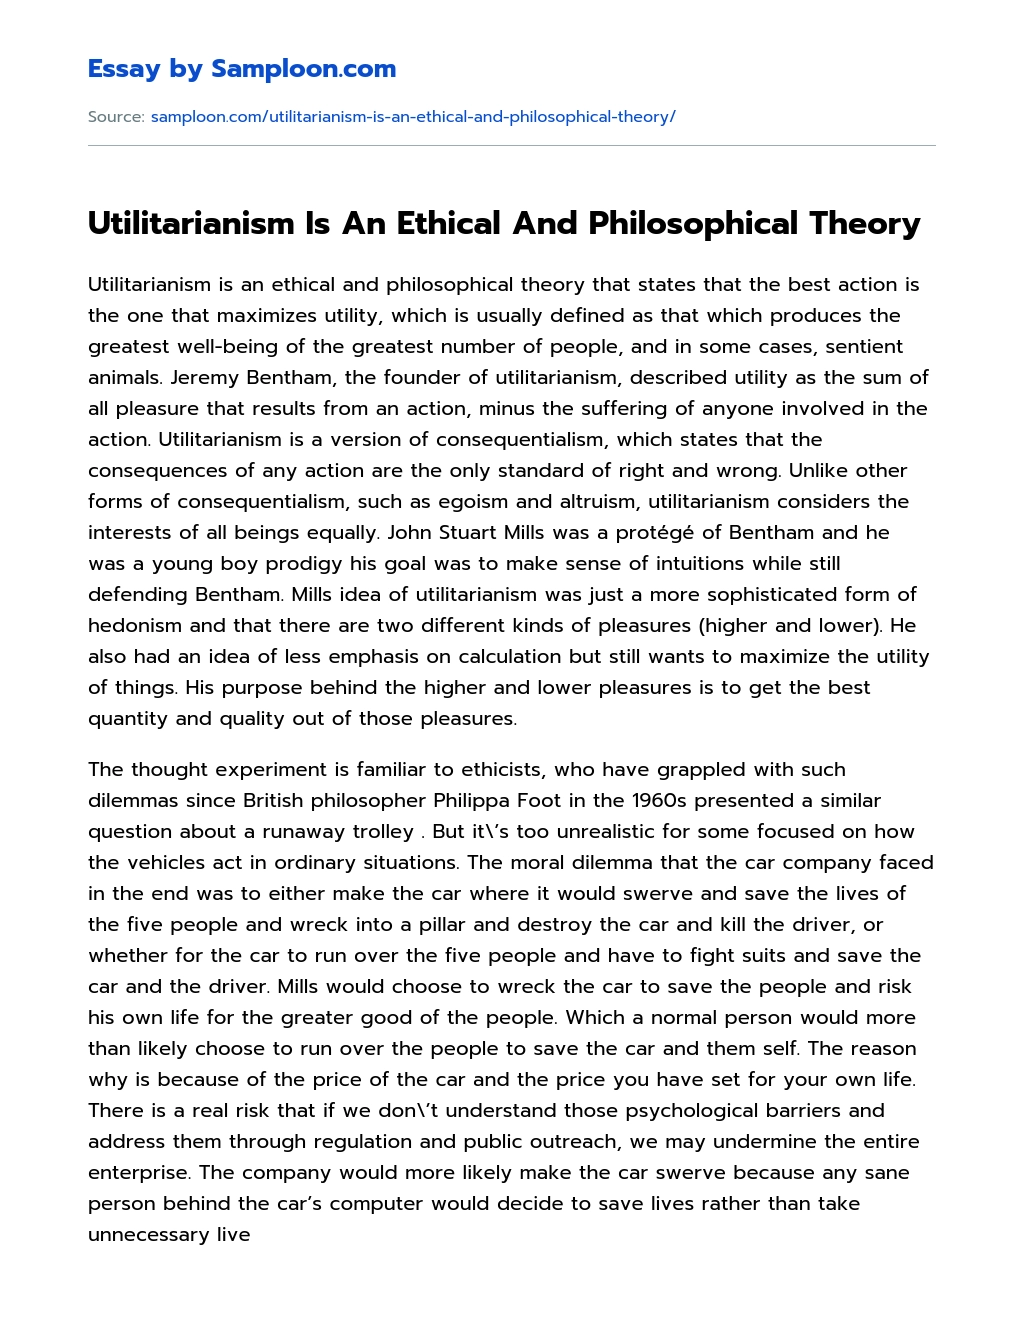 Utilitarianism Is An Ethical And Philosophical Theory essay